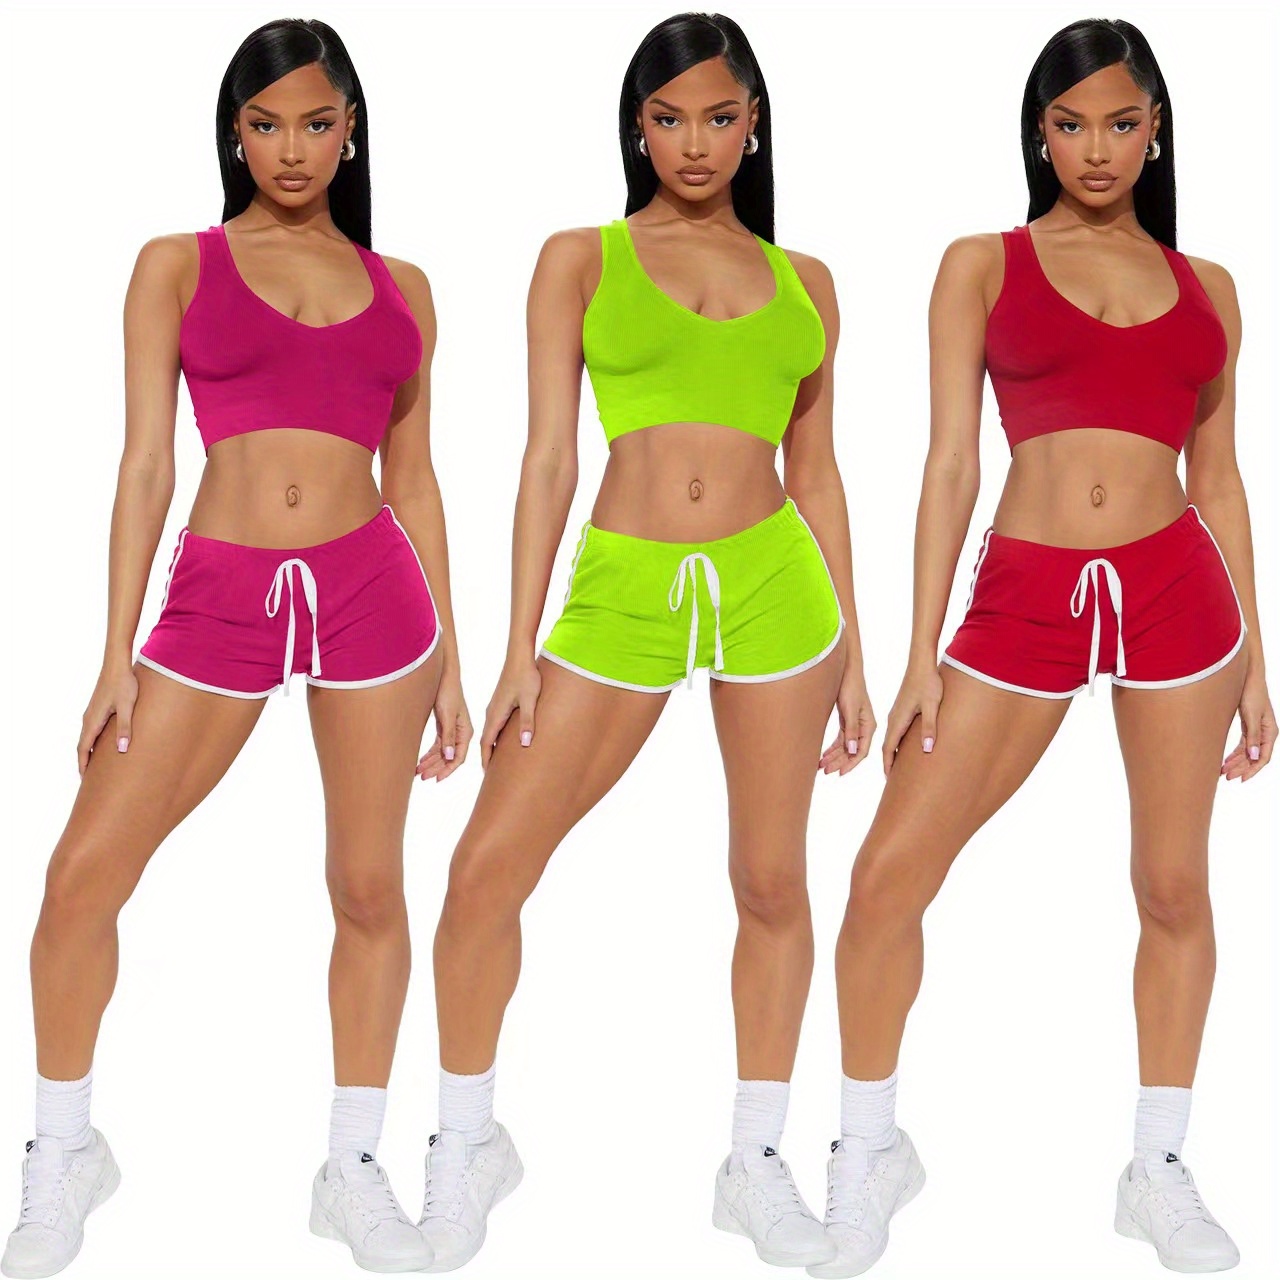 Guardoinrt 2x Add Style To Fitness Routine Wide Range Of Colorful Sports  Bras Wide black+skin color M 2Set 